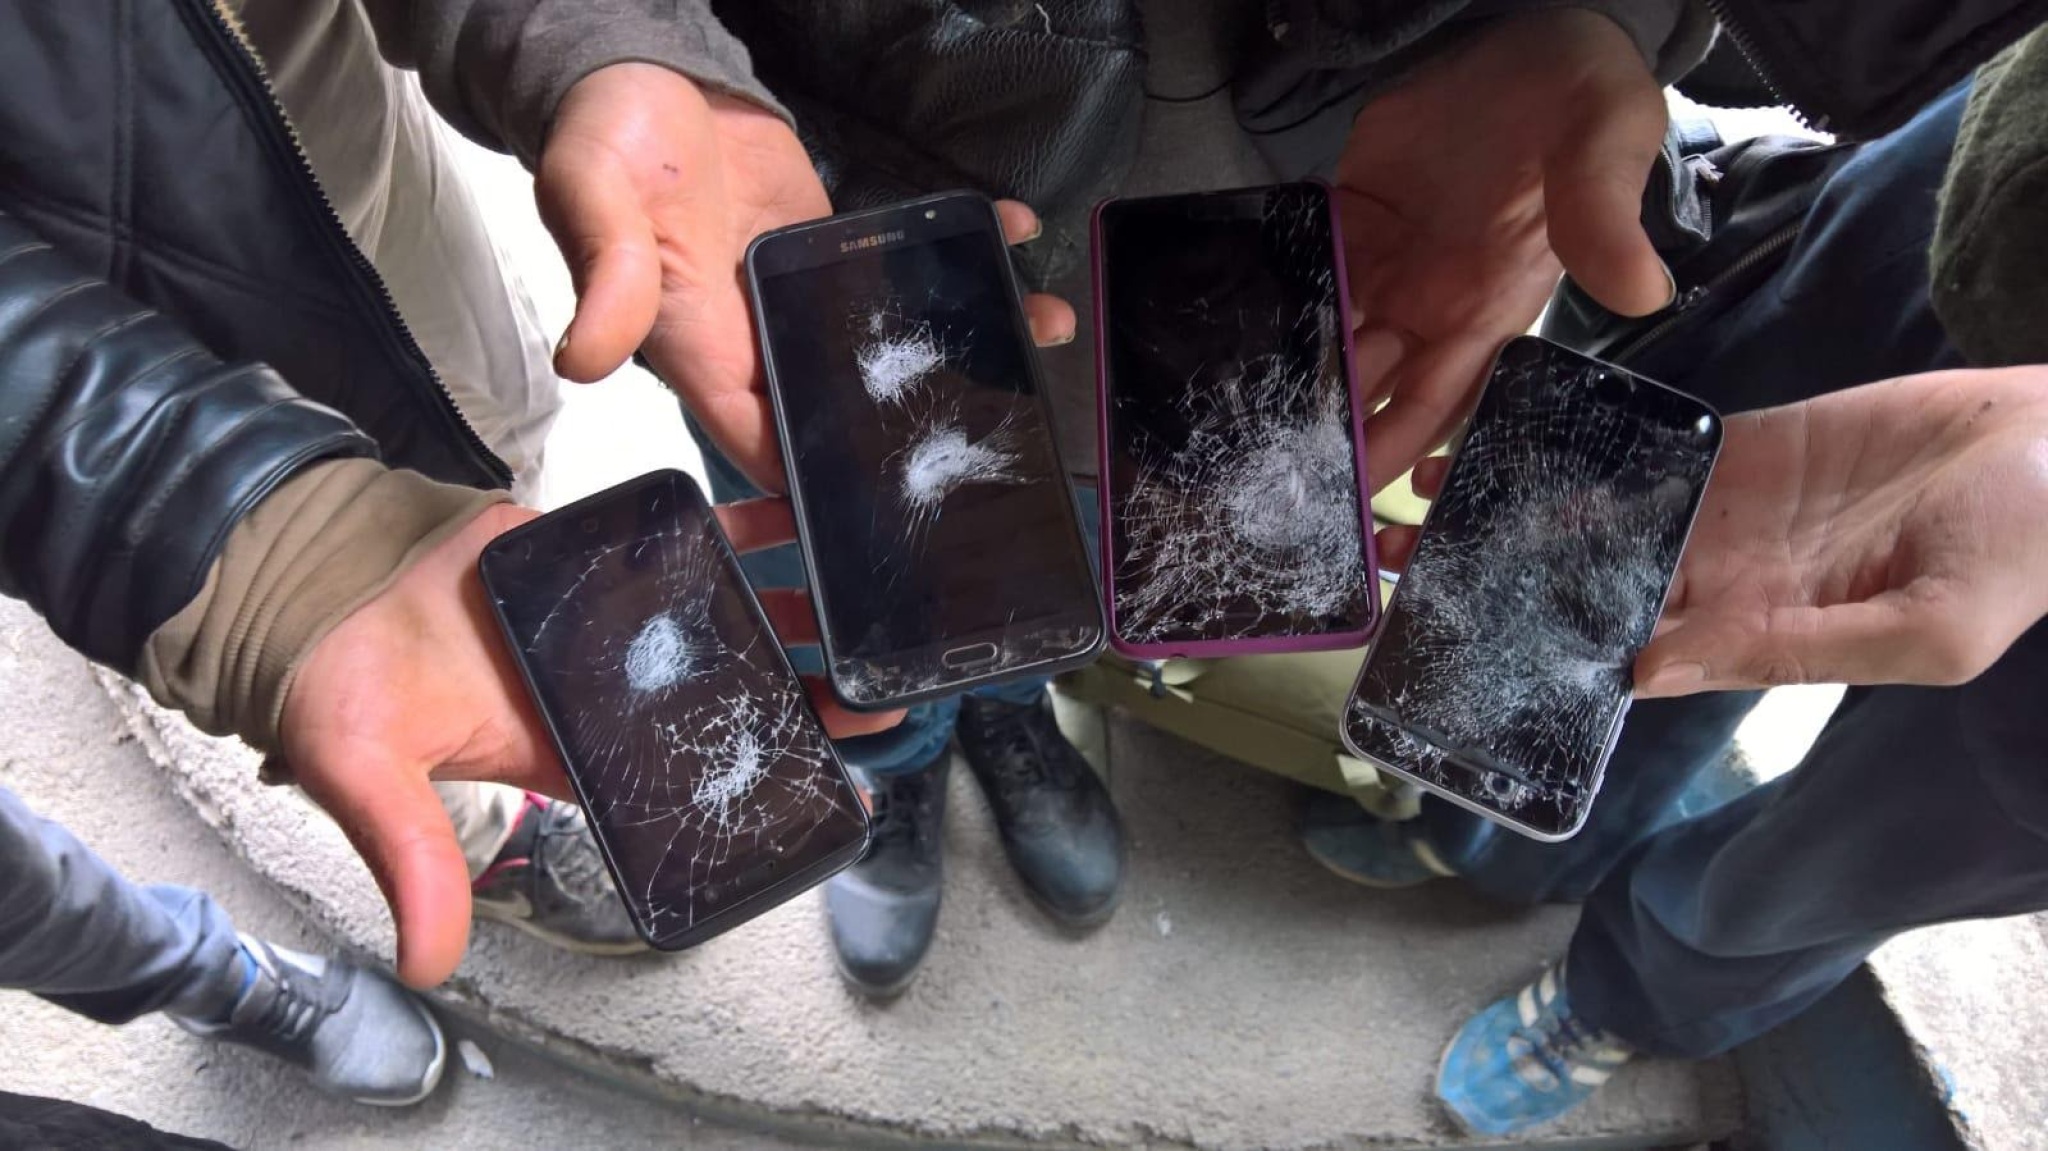 Men showing damaged phones after being pushed back from Croatia to BiH, July 2018. Photograph by Jack Sapoch.